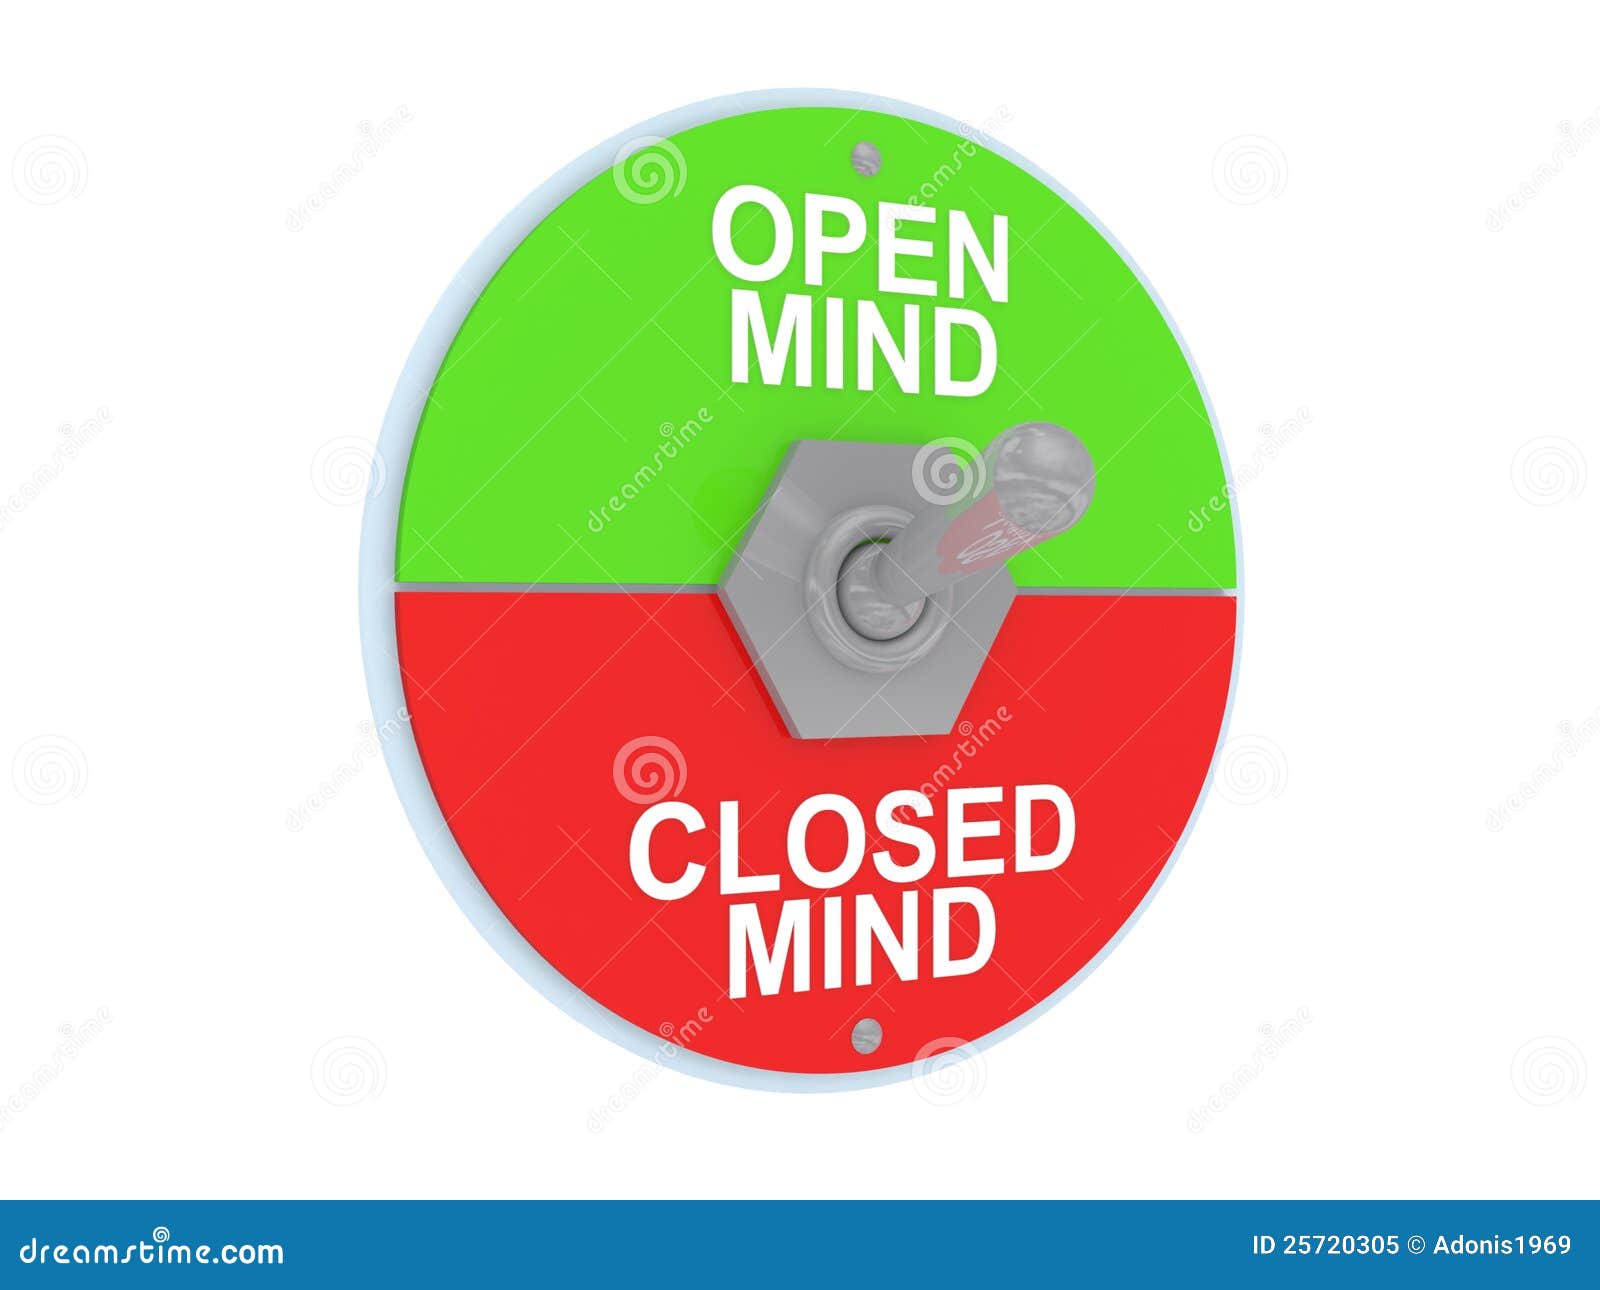 Open And Closed Mind Switch Royalty Free Stock Photo  Image: 25720305